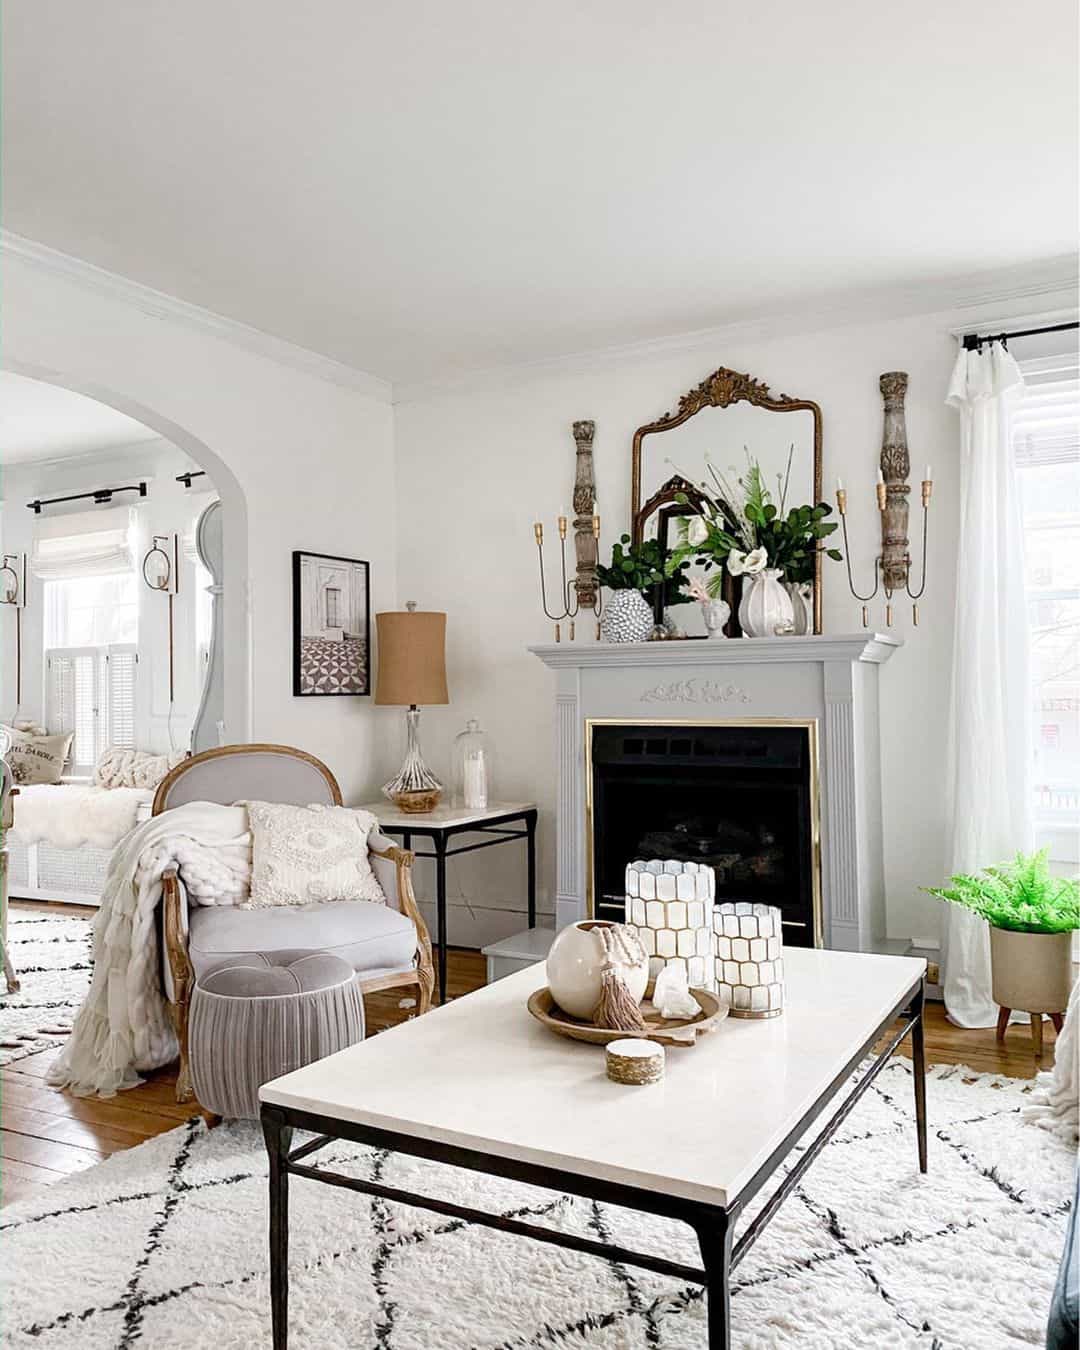 Eclectic Charms of a White Living Room